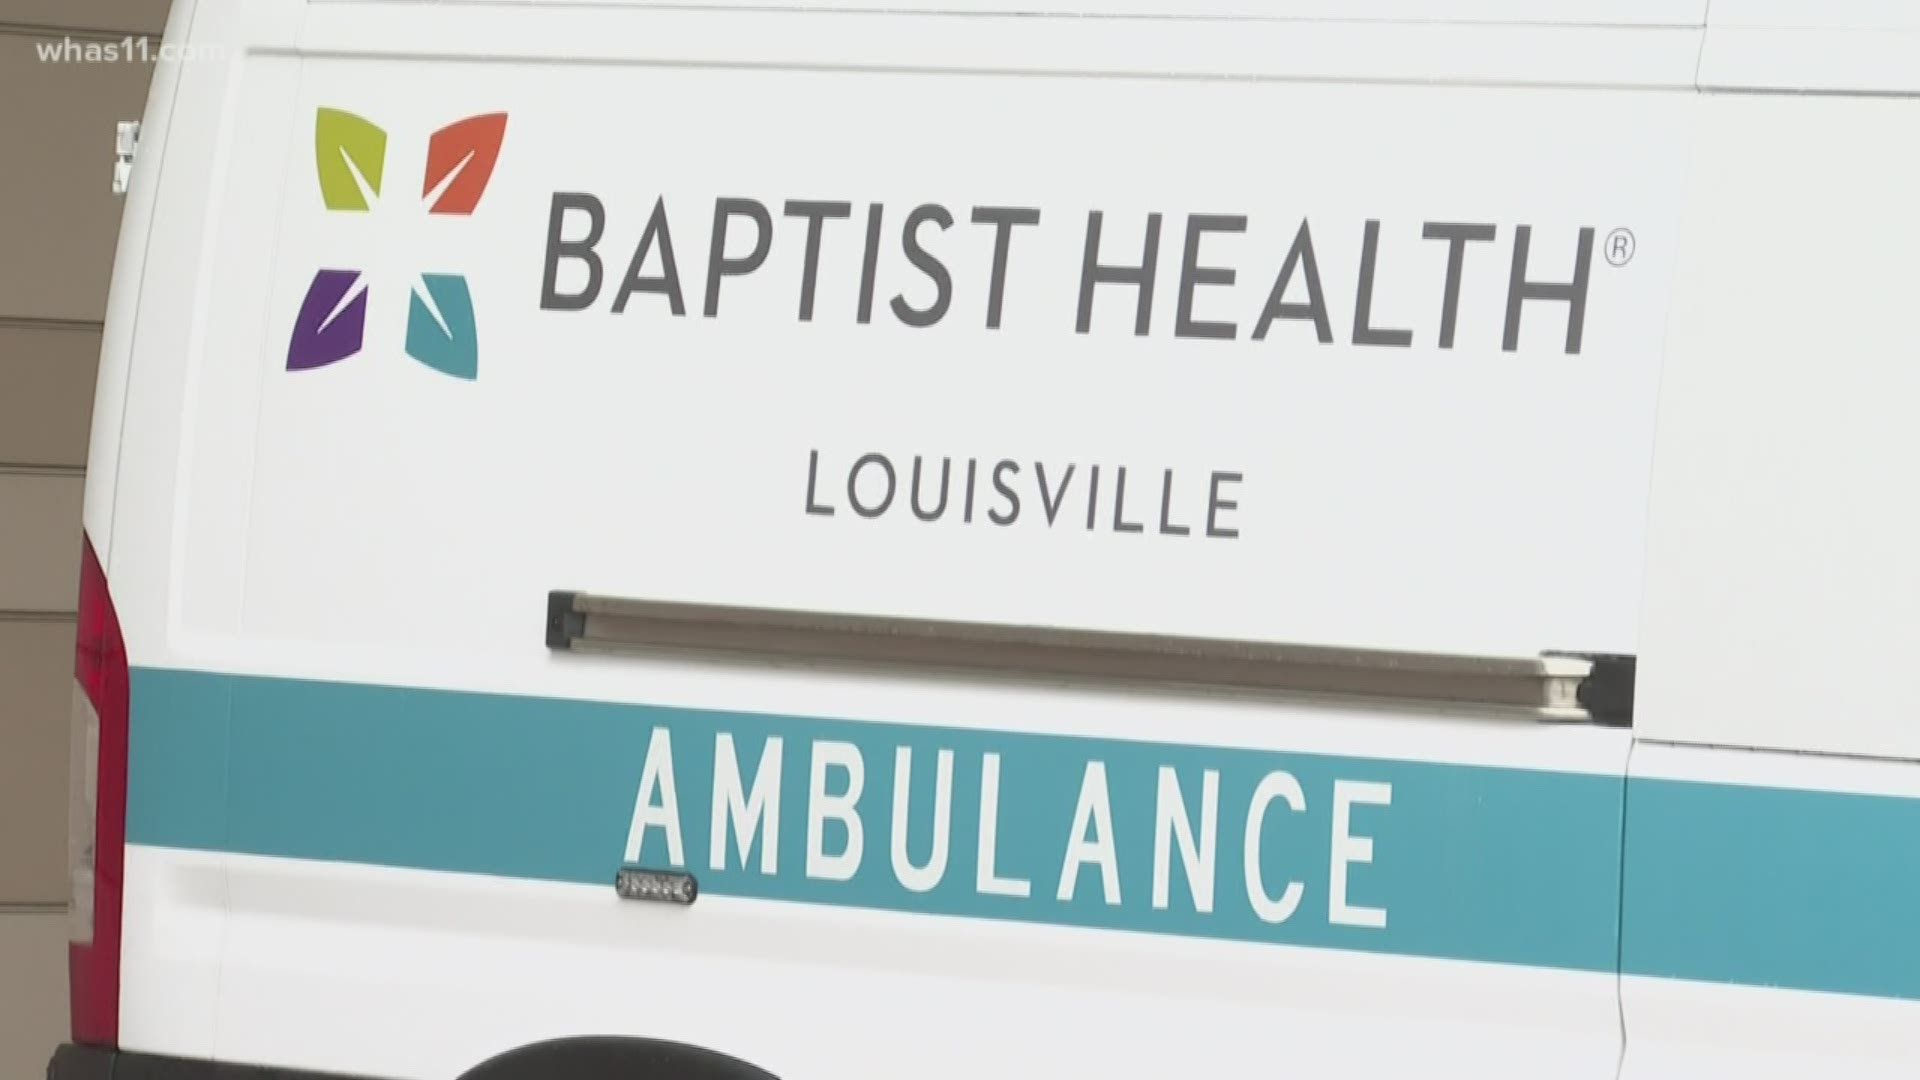 The two new ambulances will be used to move patients from the hospital to nursing and rehab facilities.